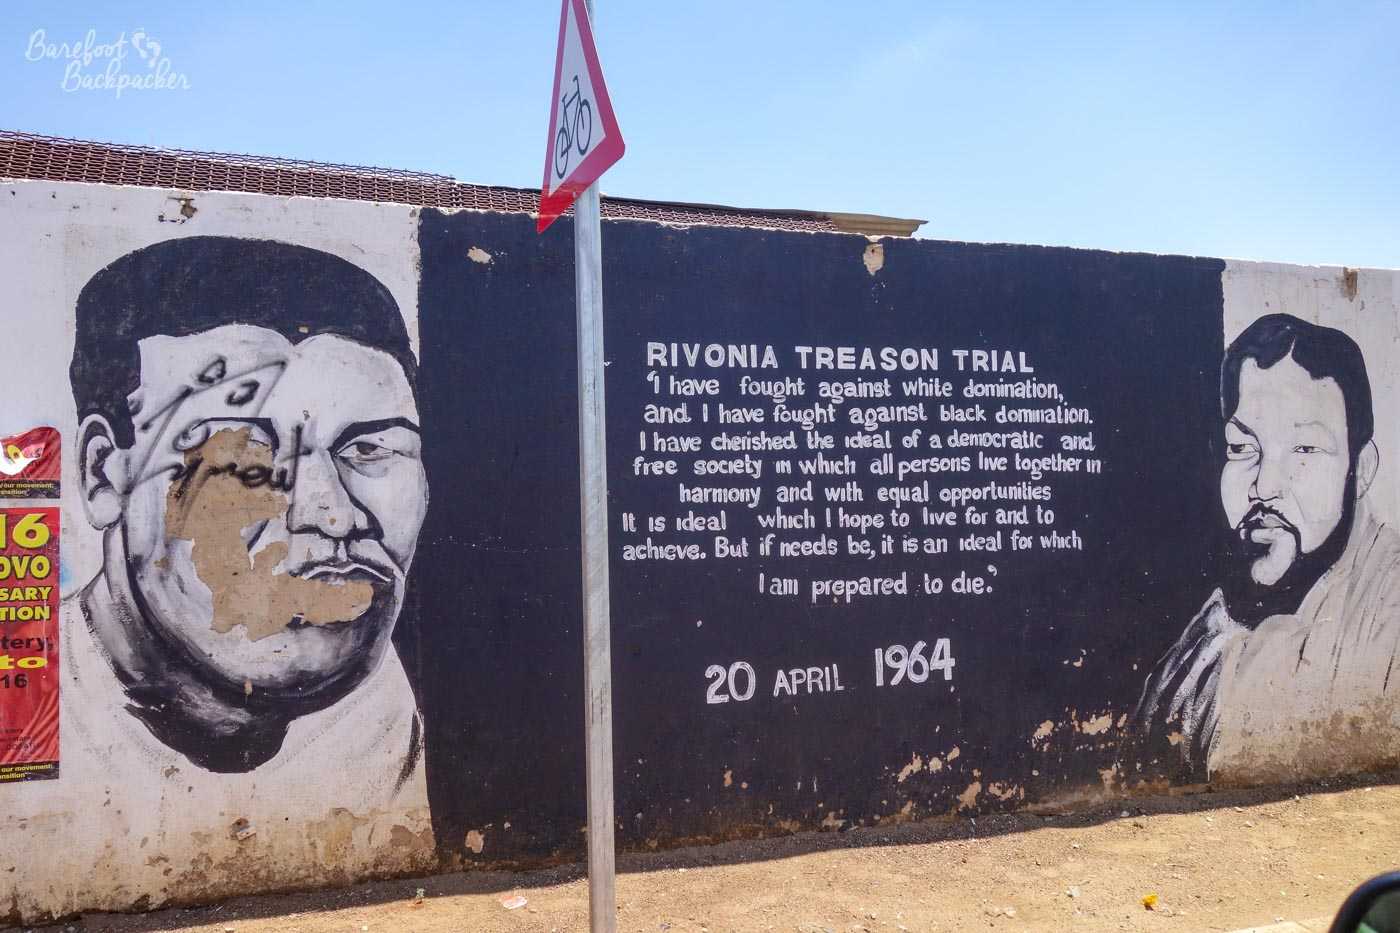 Extract from a speech by Nelson Mandela at his trial, prior to imprisonment in 1964, which in summary says 'I am prepared to die for the cause of an equal and free South Africa'. It's painted on a wall in Soweto.